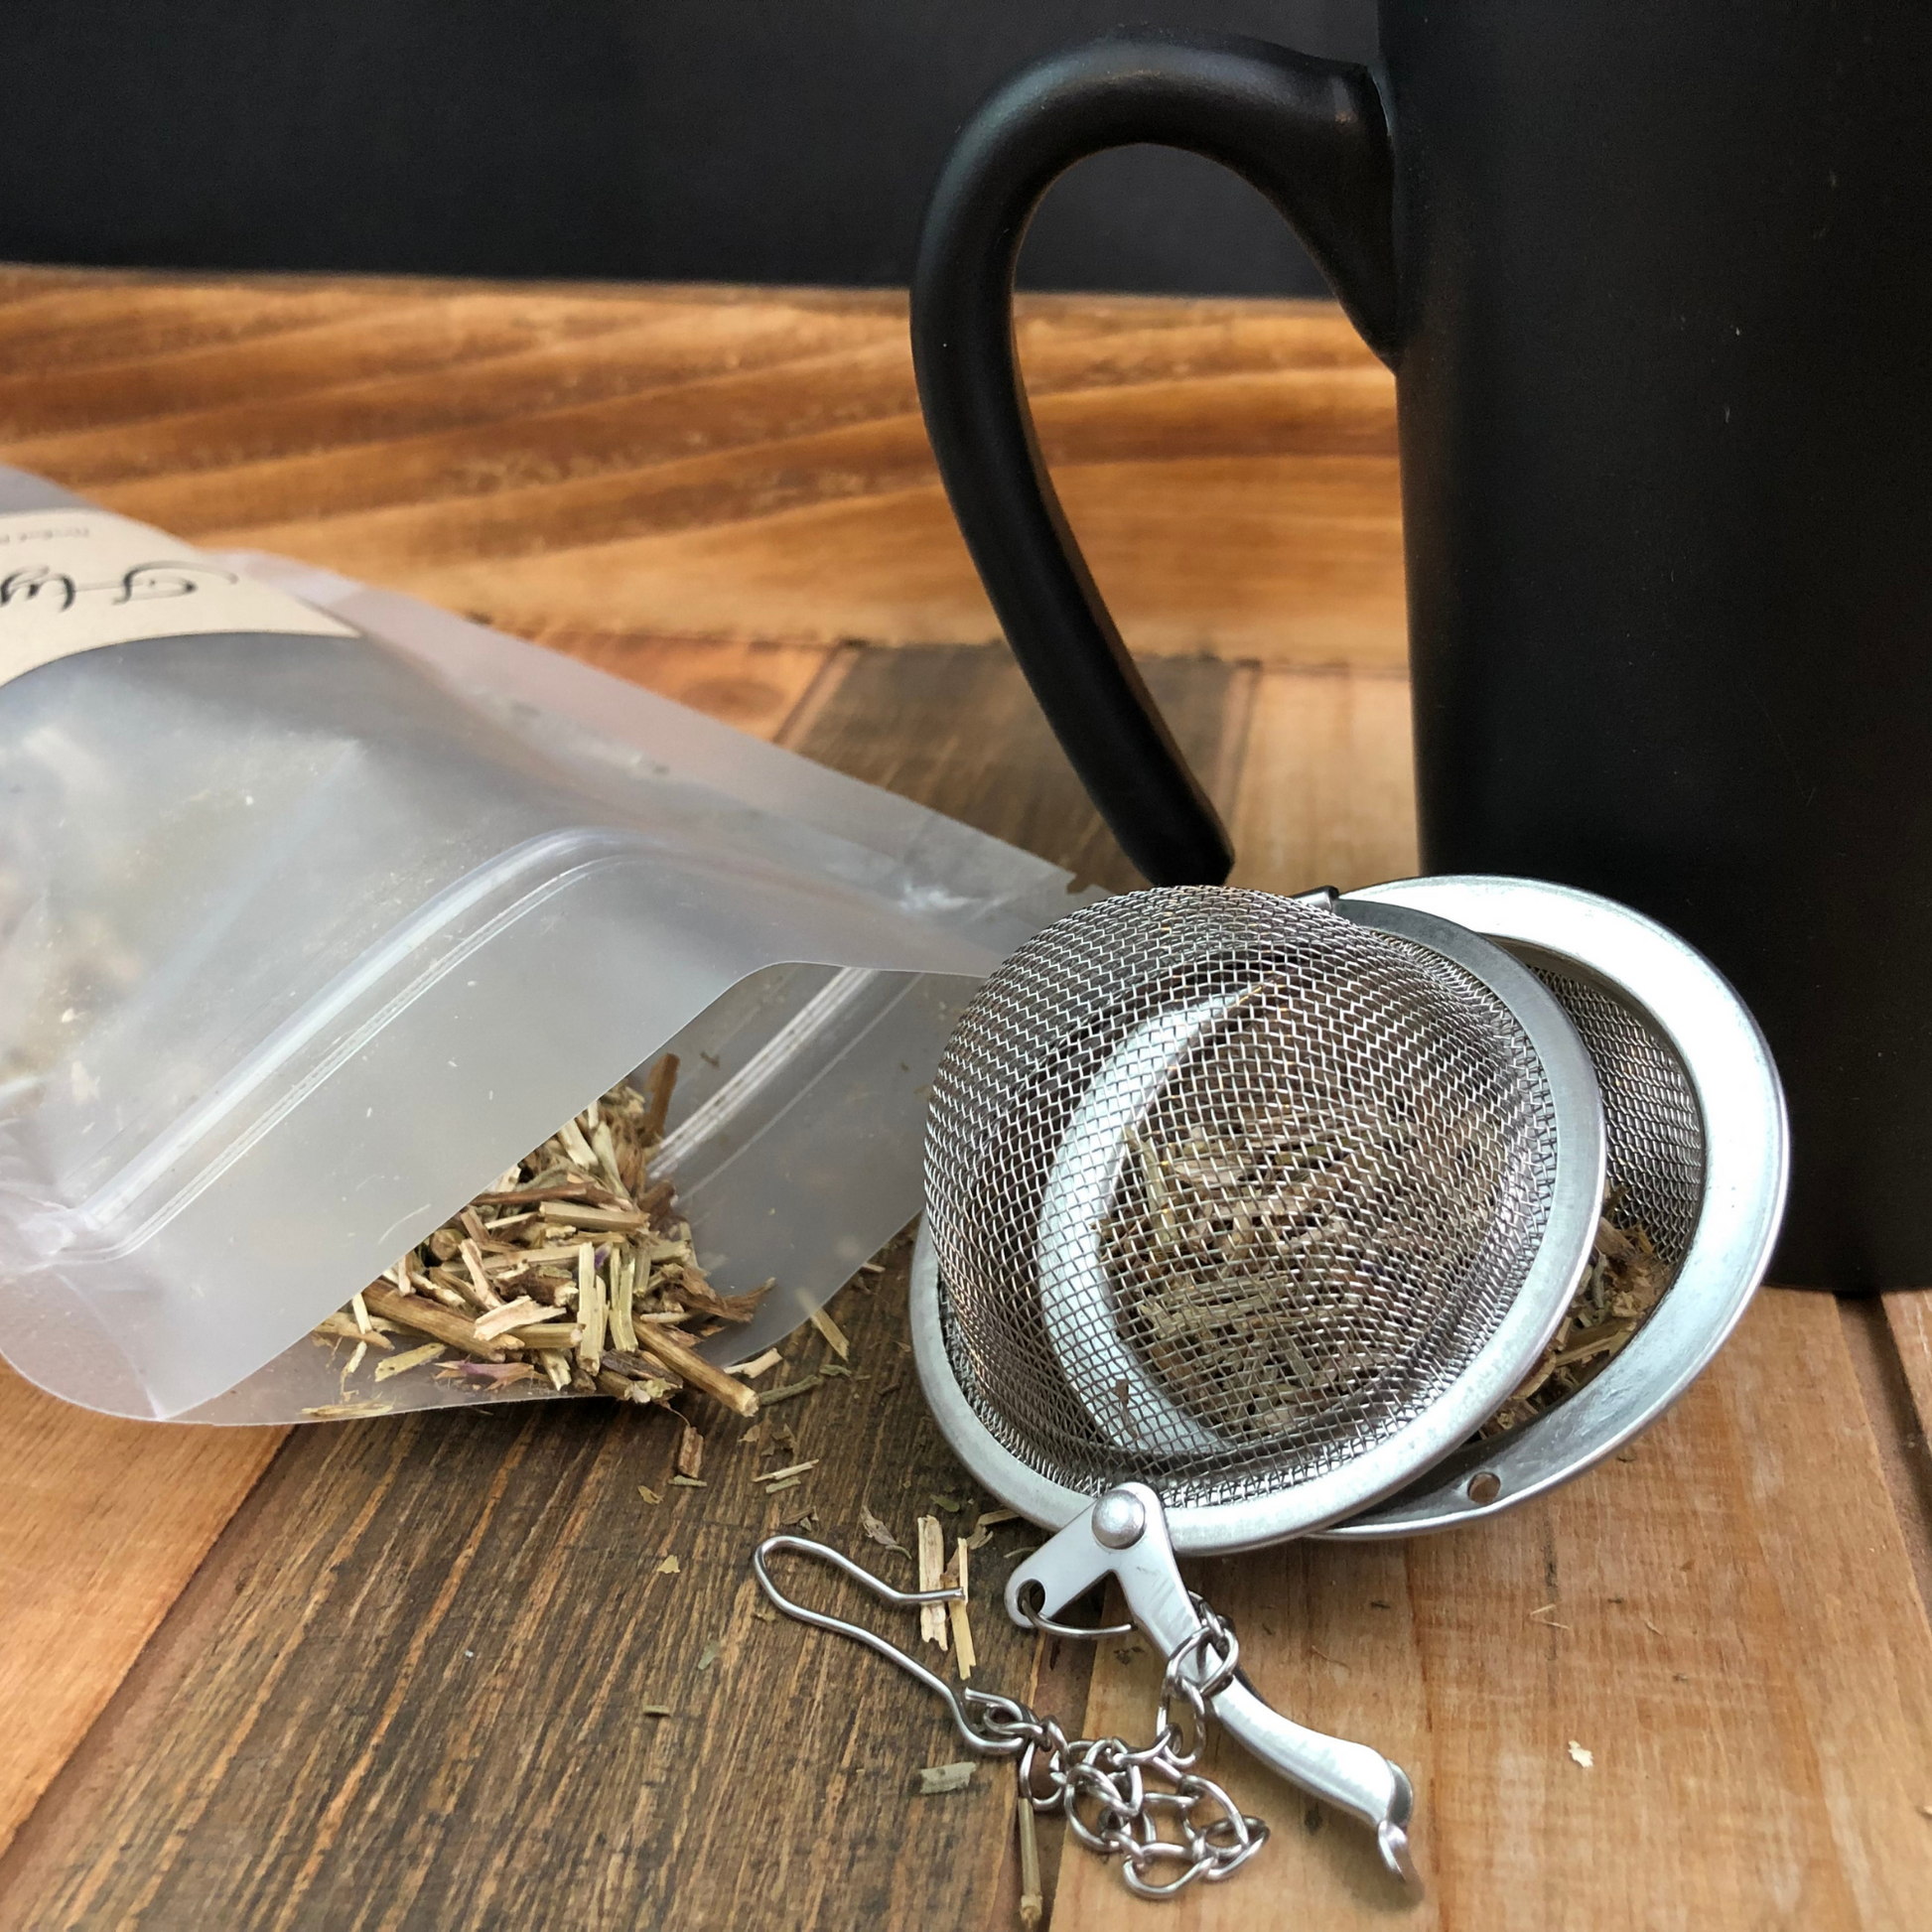 image of dried hyssop spilling out a clear bag next to a black and red coffee mug and mesh tea infuser on a wooden table with a black  background